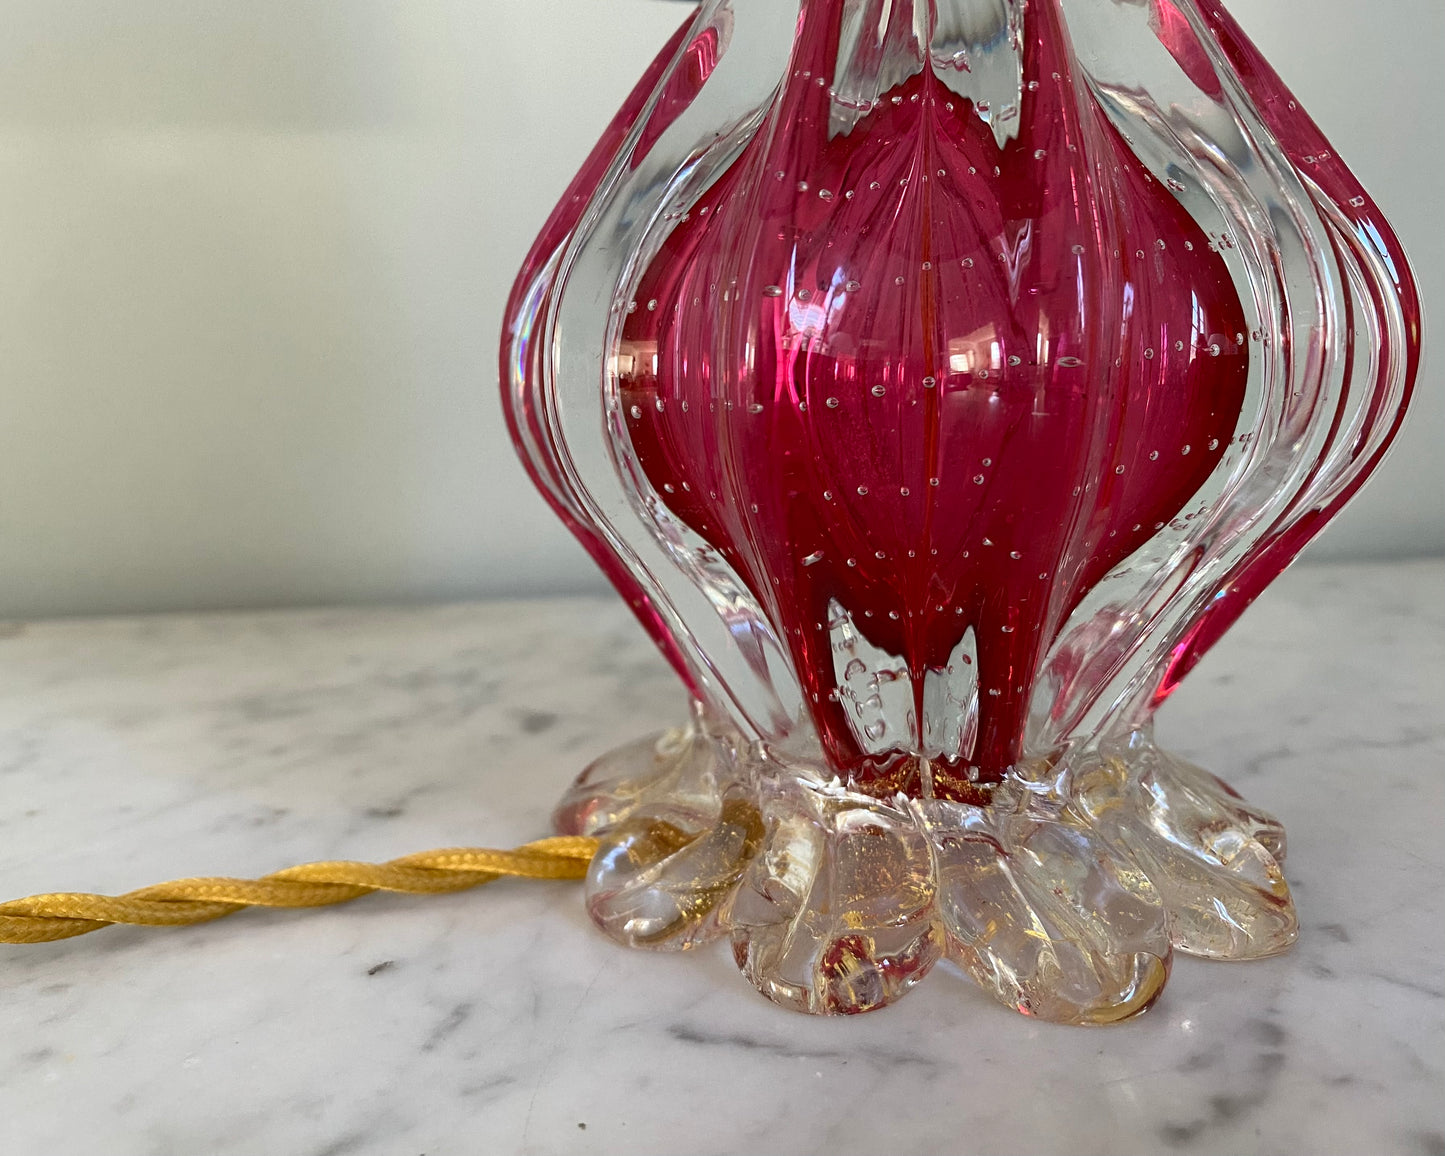 Murano Glass Lamp from Barovier & Toso with customized shade